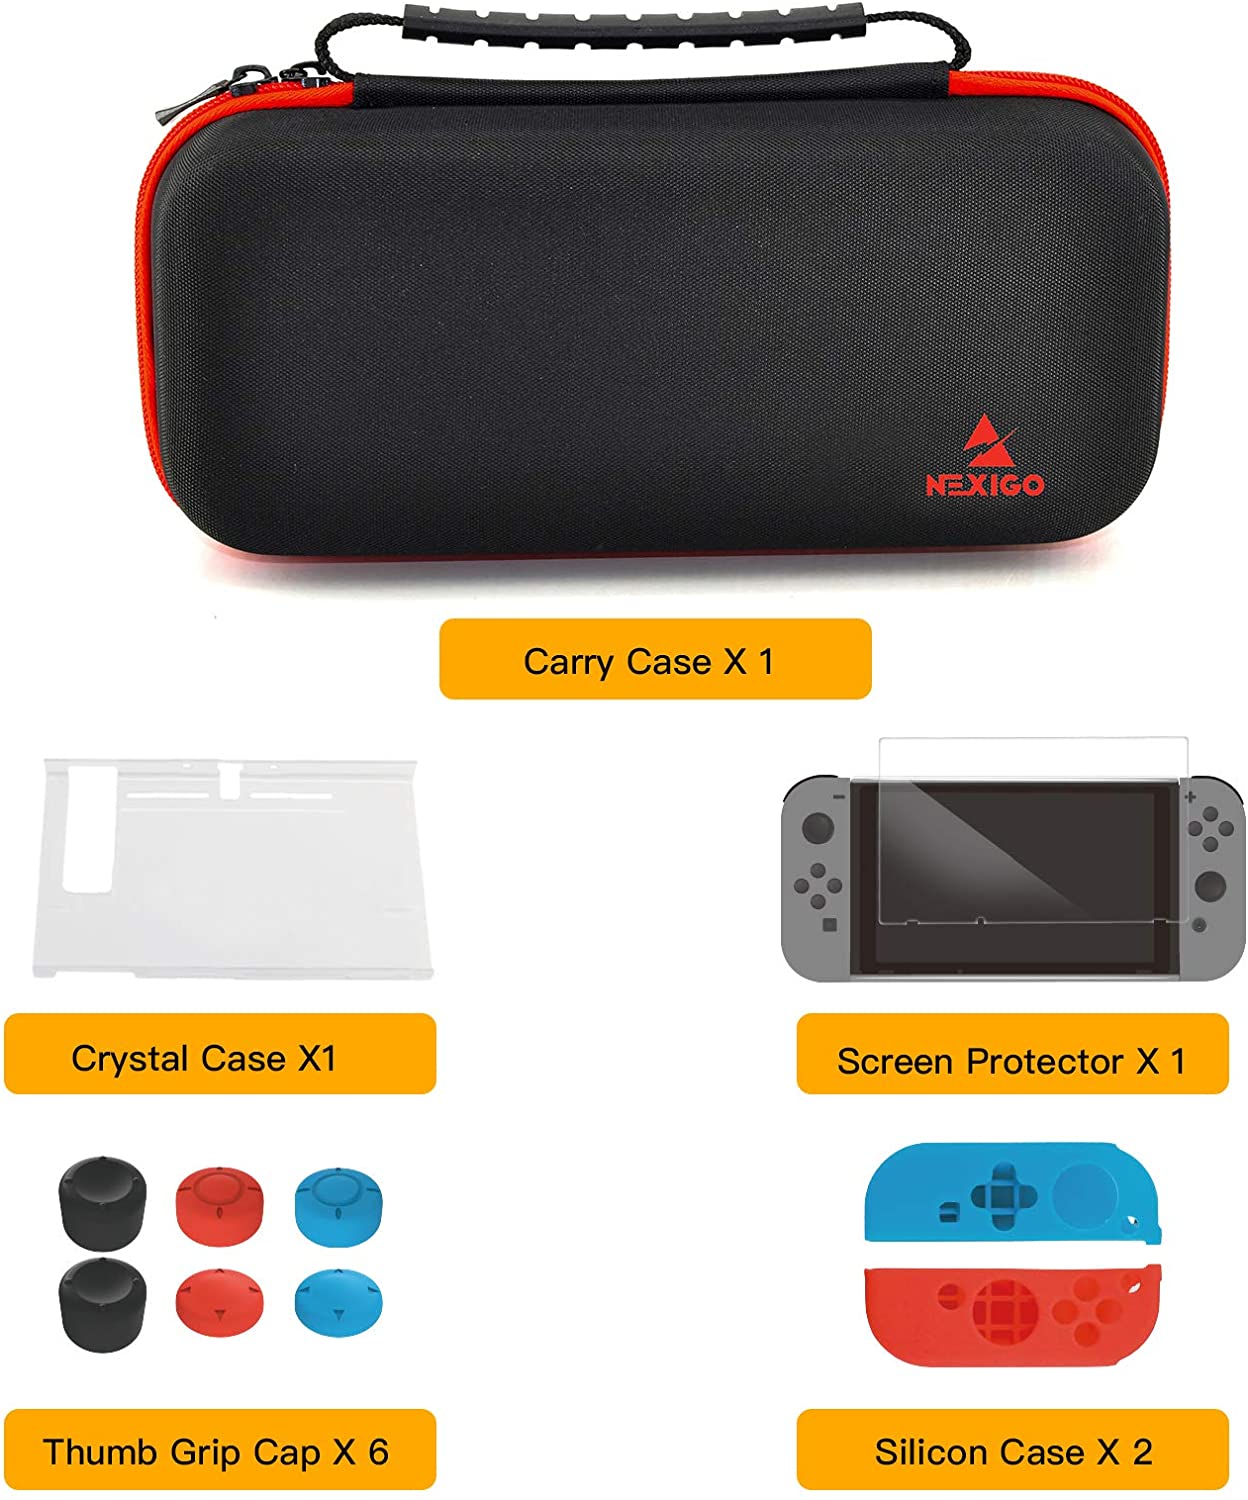 Package includes carrying case, screen protector, 2 silicone cases, 6 joystick caps, and acrylic cover.